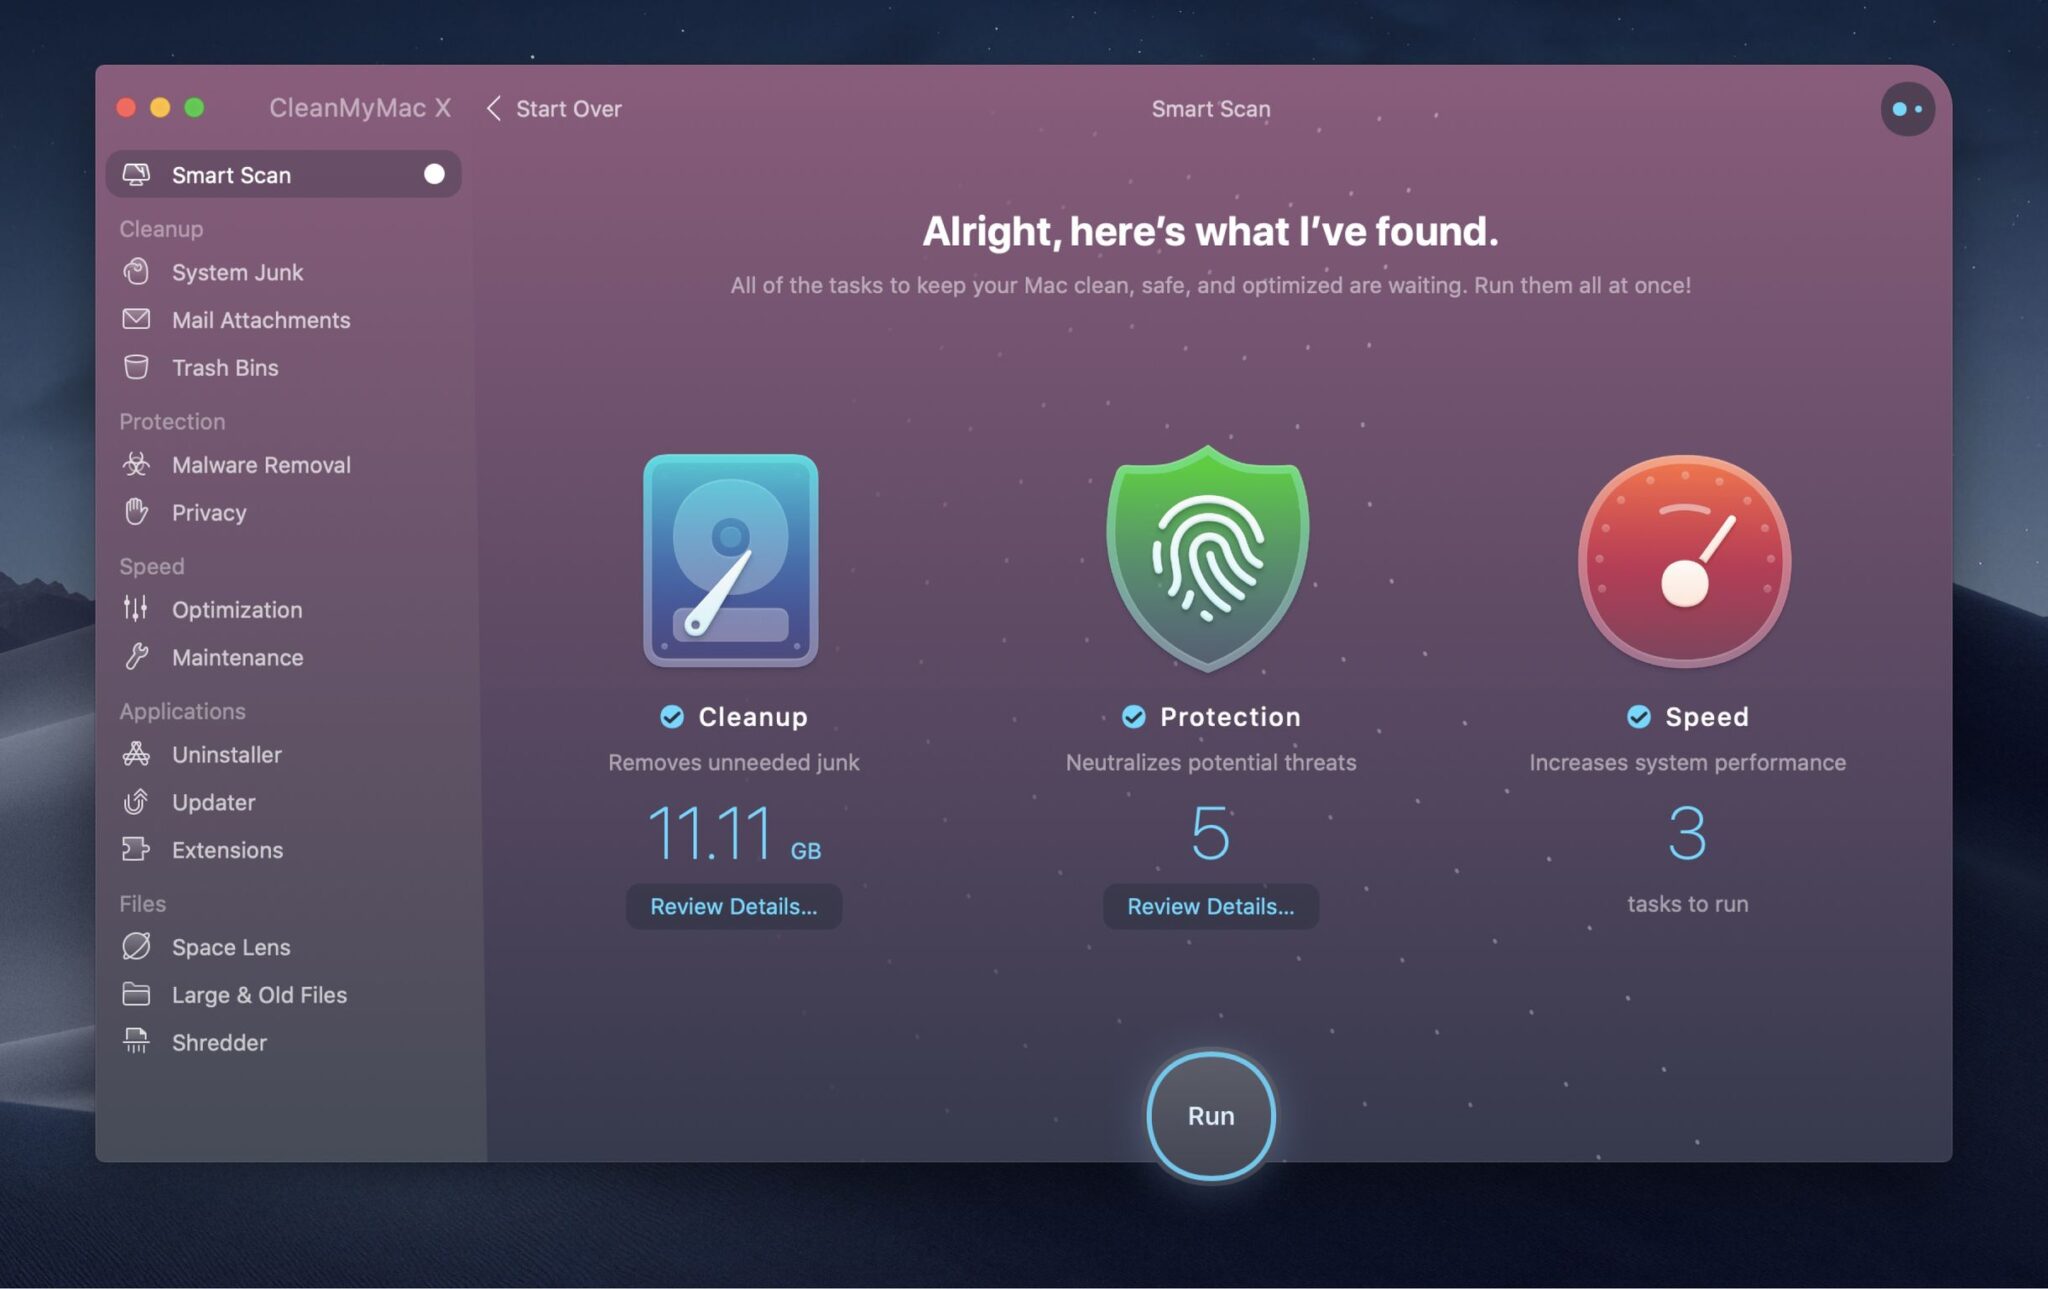 download the last version for windows CleanMyMac X